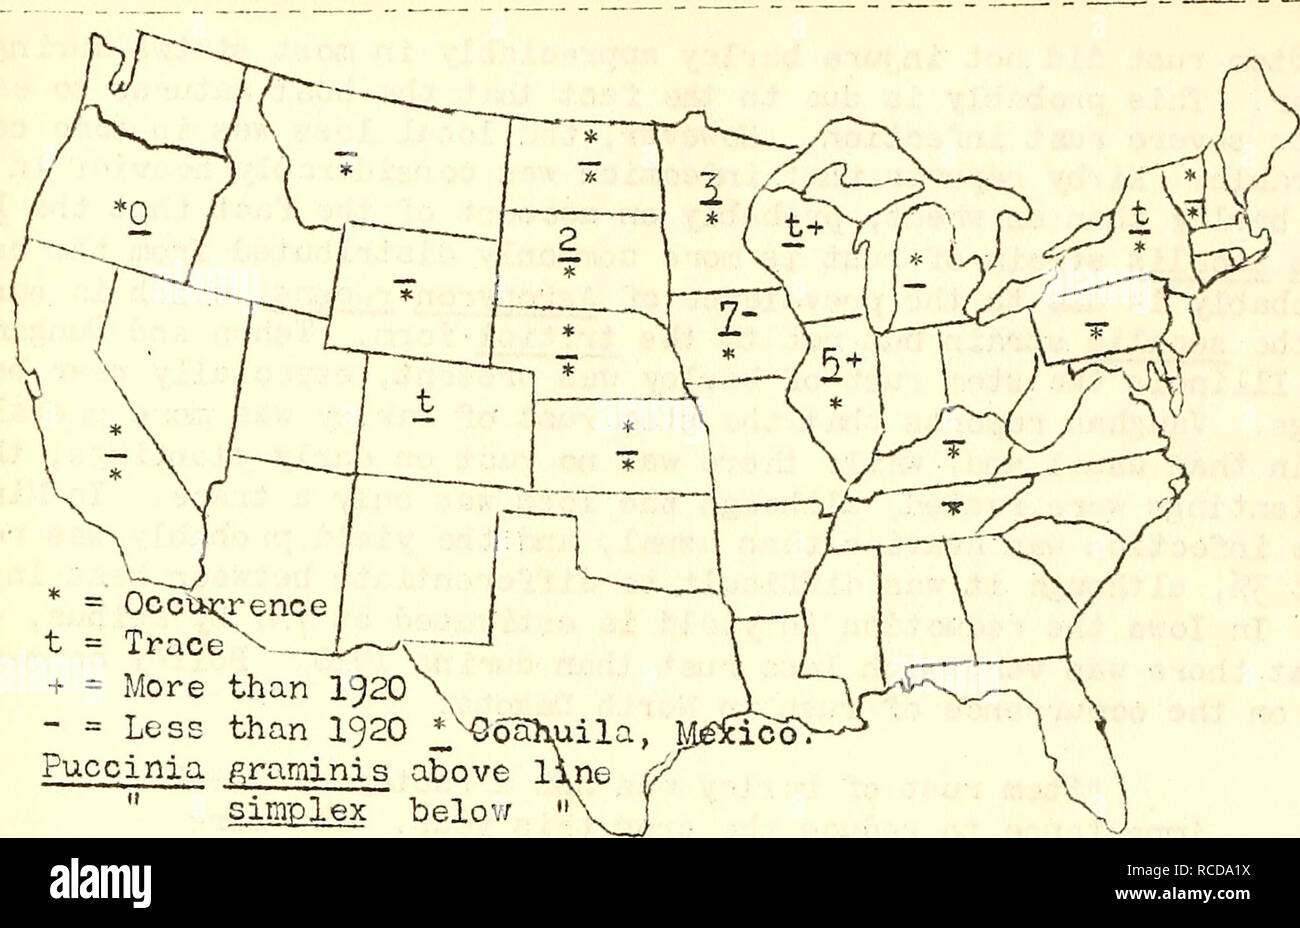 . Diseases of cereal and forage crops in the United States in 1921. Grain Diseases and pests United States; Forage plants Diseases and pests United States. 212 BARLEY - Net blotch. Pig- 53- Occurrence of stern mst (Fuccinia f;raminis) and leaf rust (Puccinia simplex) of barley during I92I. Net blotch caused by Helminthosporium teres Sacc. Helrninthosporium teres was observed in eleven states: Nev/ York, Illinois, Michigan, Wisconsin, I'innesotaj North Dakota, South Dakota, Montana, Colorado, Oregon, and California. Melhus estim;^ted that the net blotch reduced the yield in lov/a by Evans repor Stock Photo